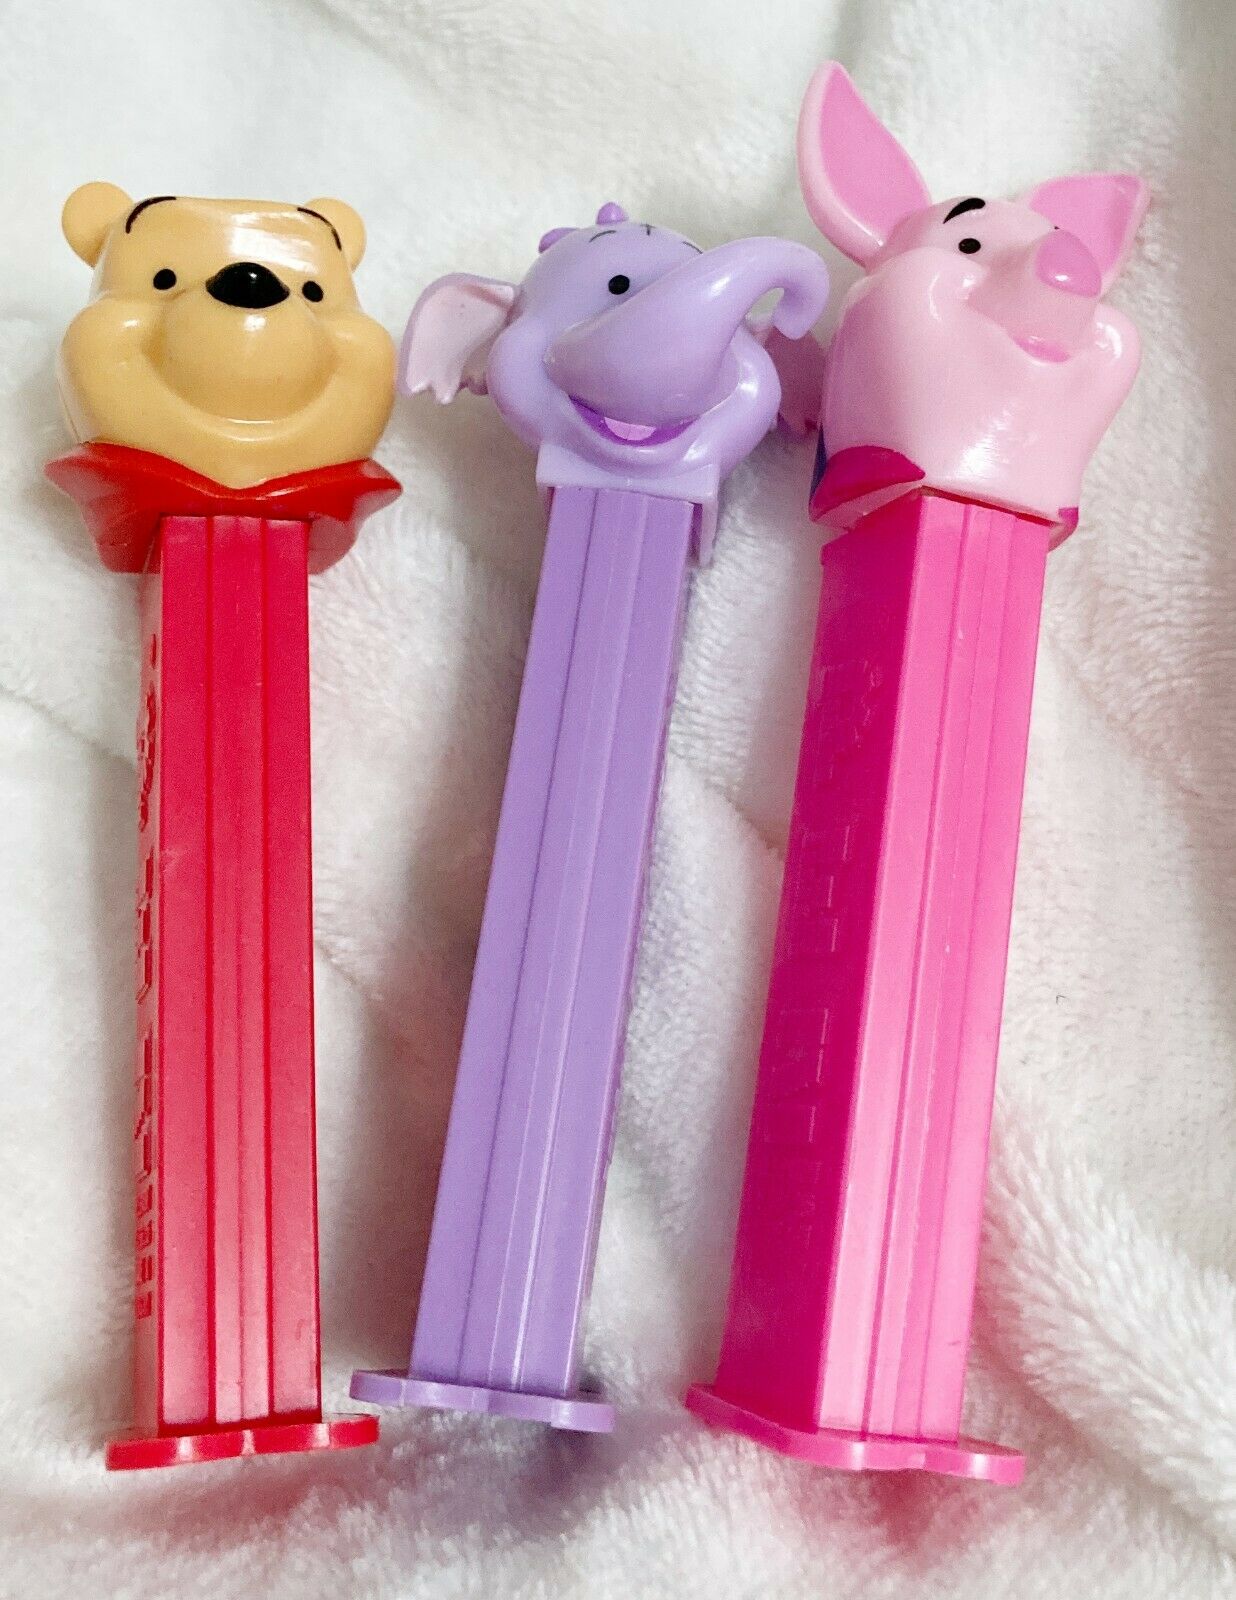 PEZ and Disney, Winnie the Pooh, Piglet and Lumpy Candy Dispensers, Lot of 3